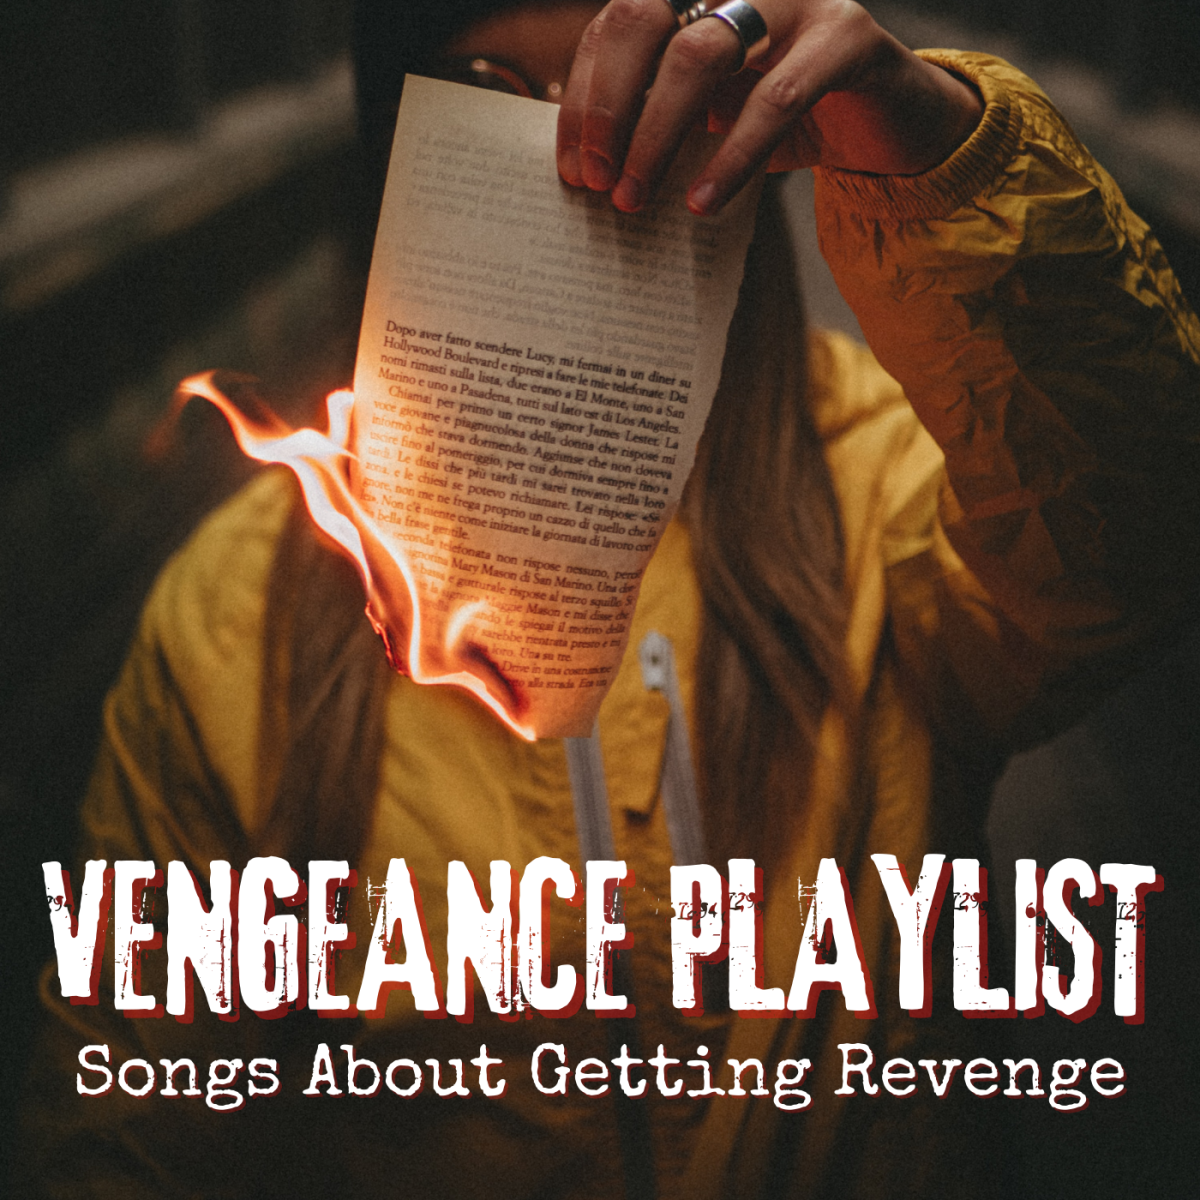 Make a fun revenge playlist with these rock, pop, and country songs. Because sometimes karma needs a little push in the right direction.